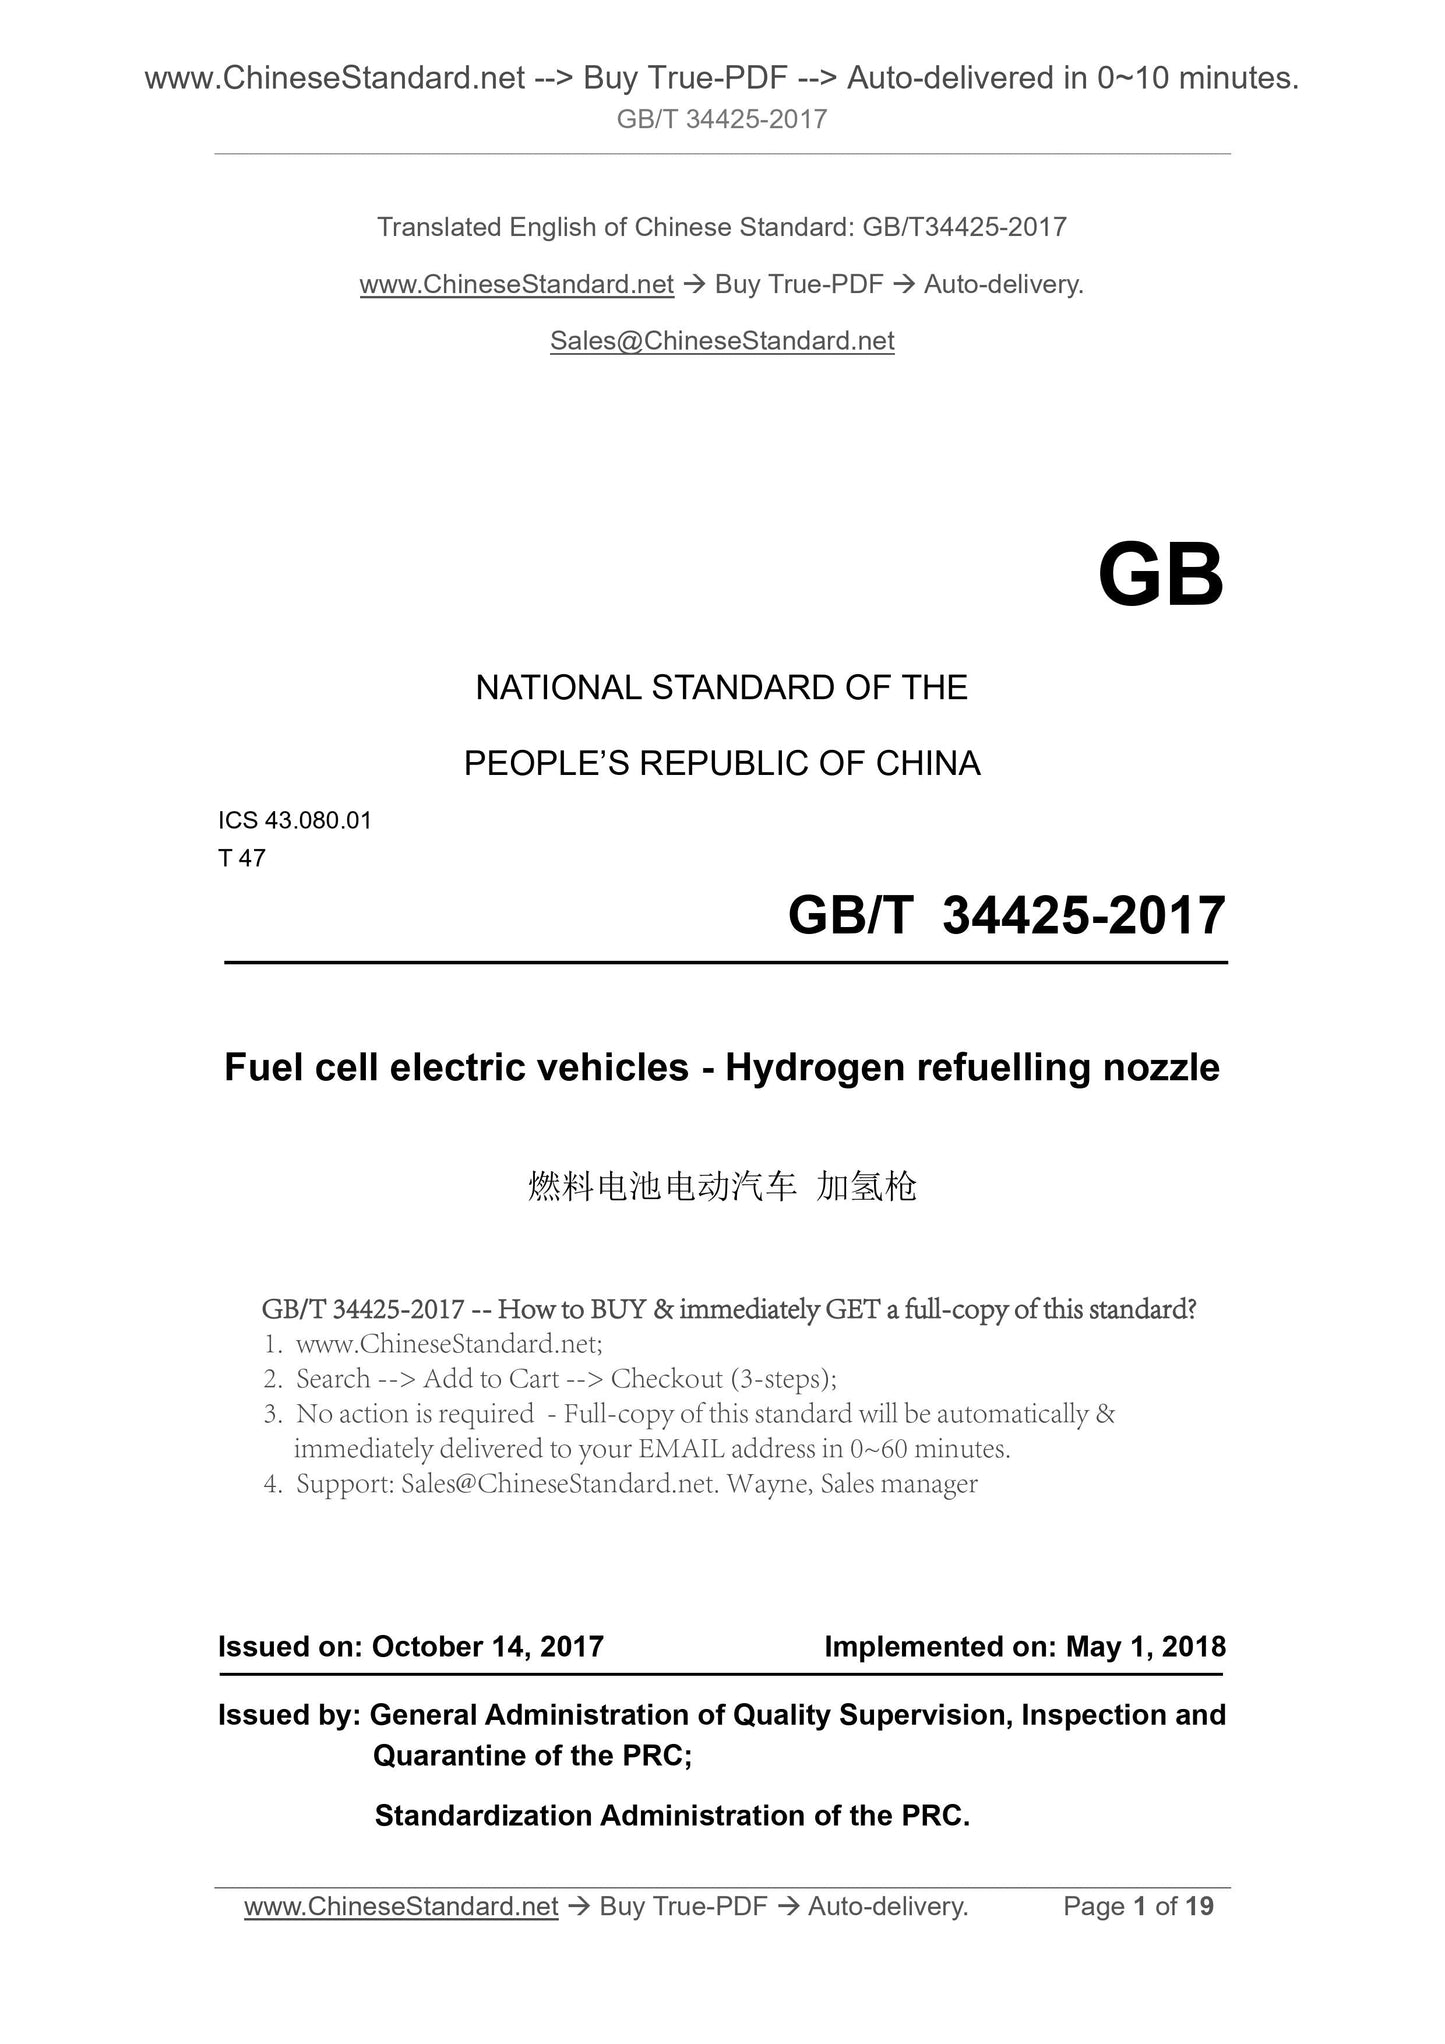 GB/T 34425-2017 Page 1